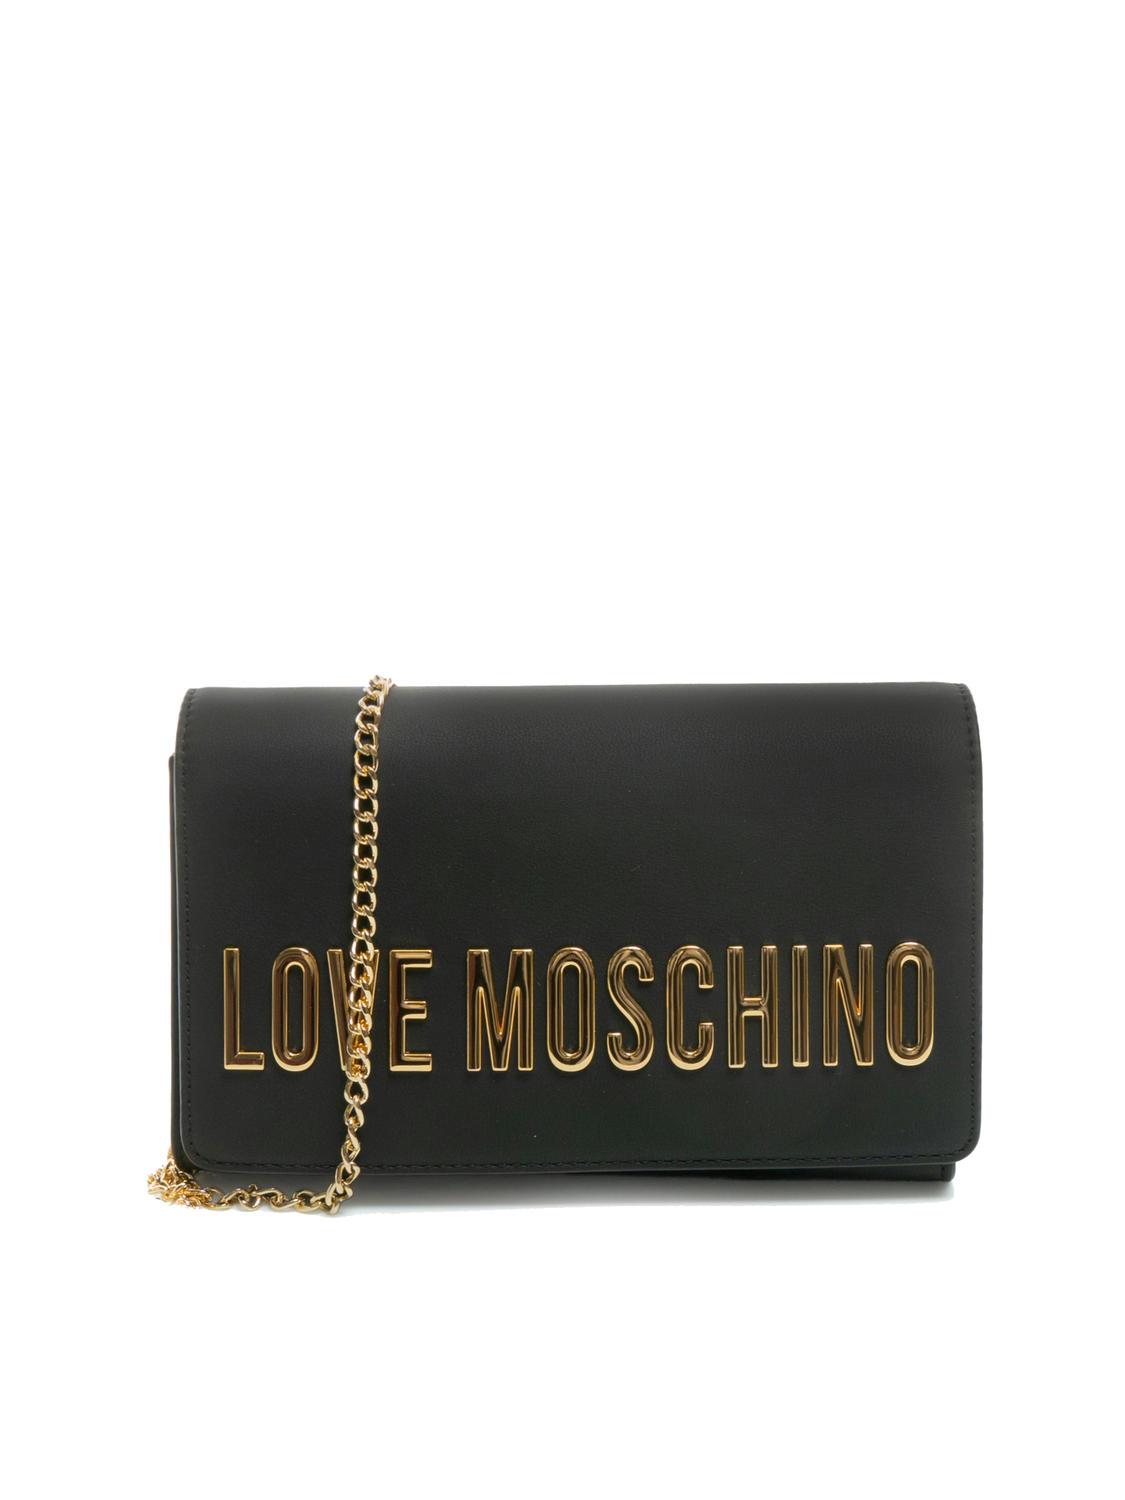 Love Moschino Smart Daily Clutch Bag With Chain Shoulder Strap